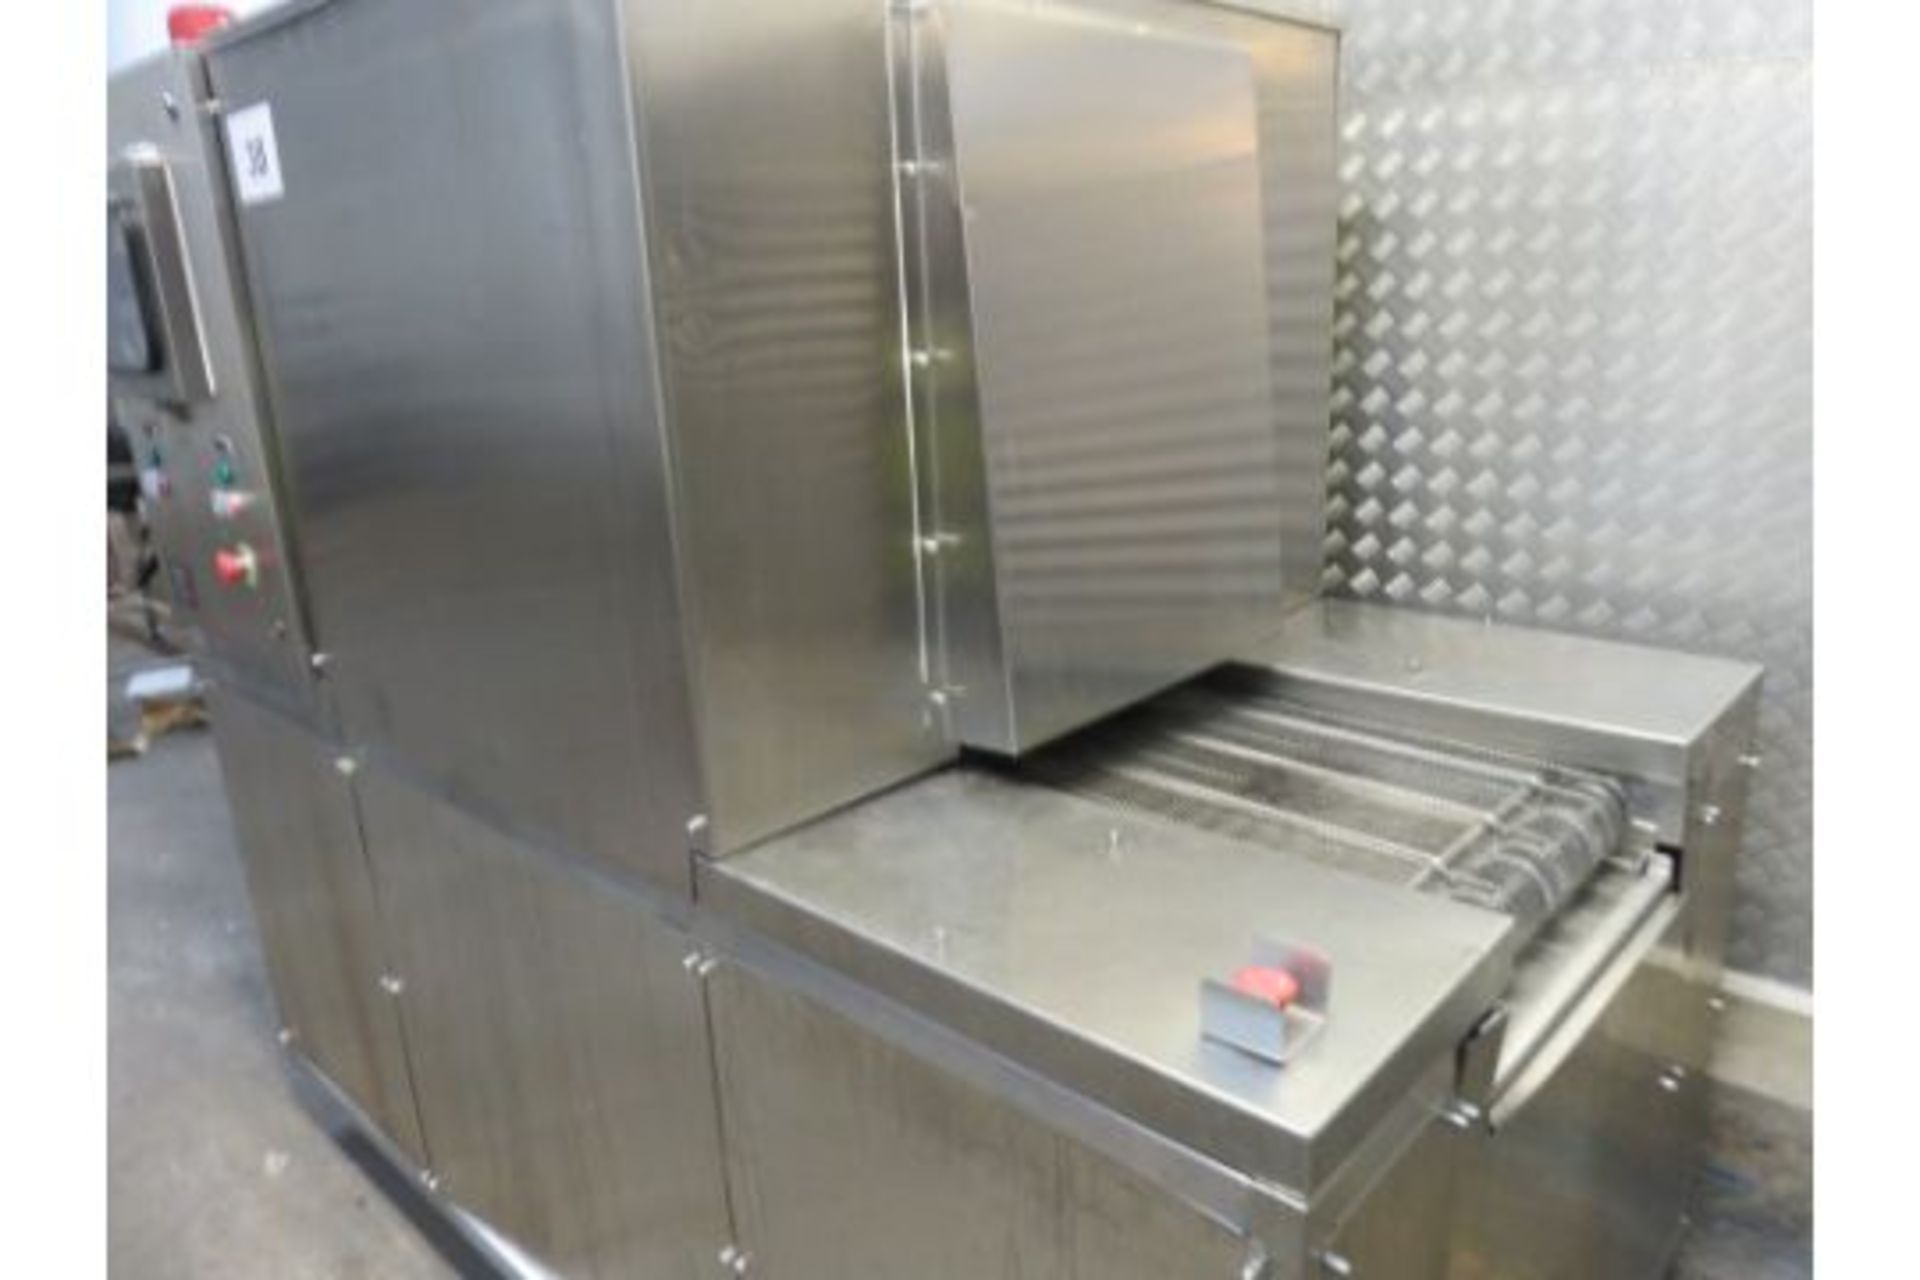 FRAMPTON CHAR GRILL. "HARDLY USED" WILL HEAT UP TO 700 DEG!!! - Image 2 of 5